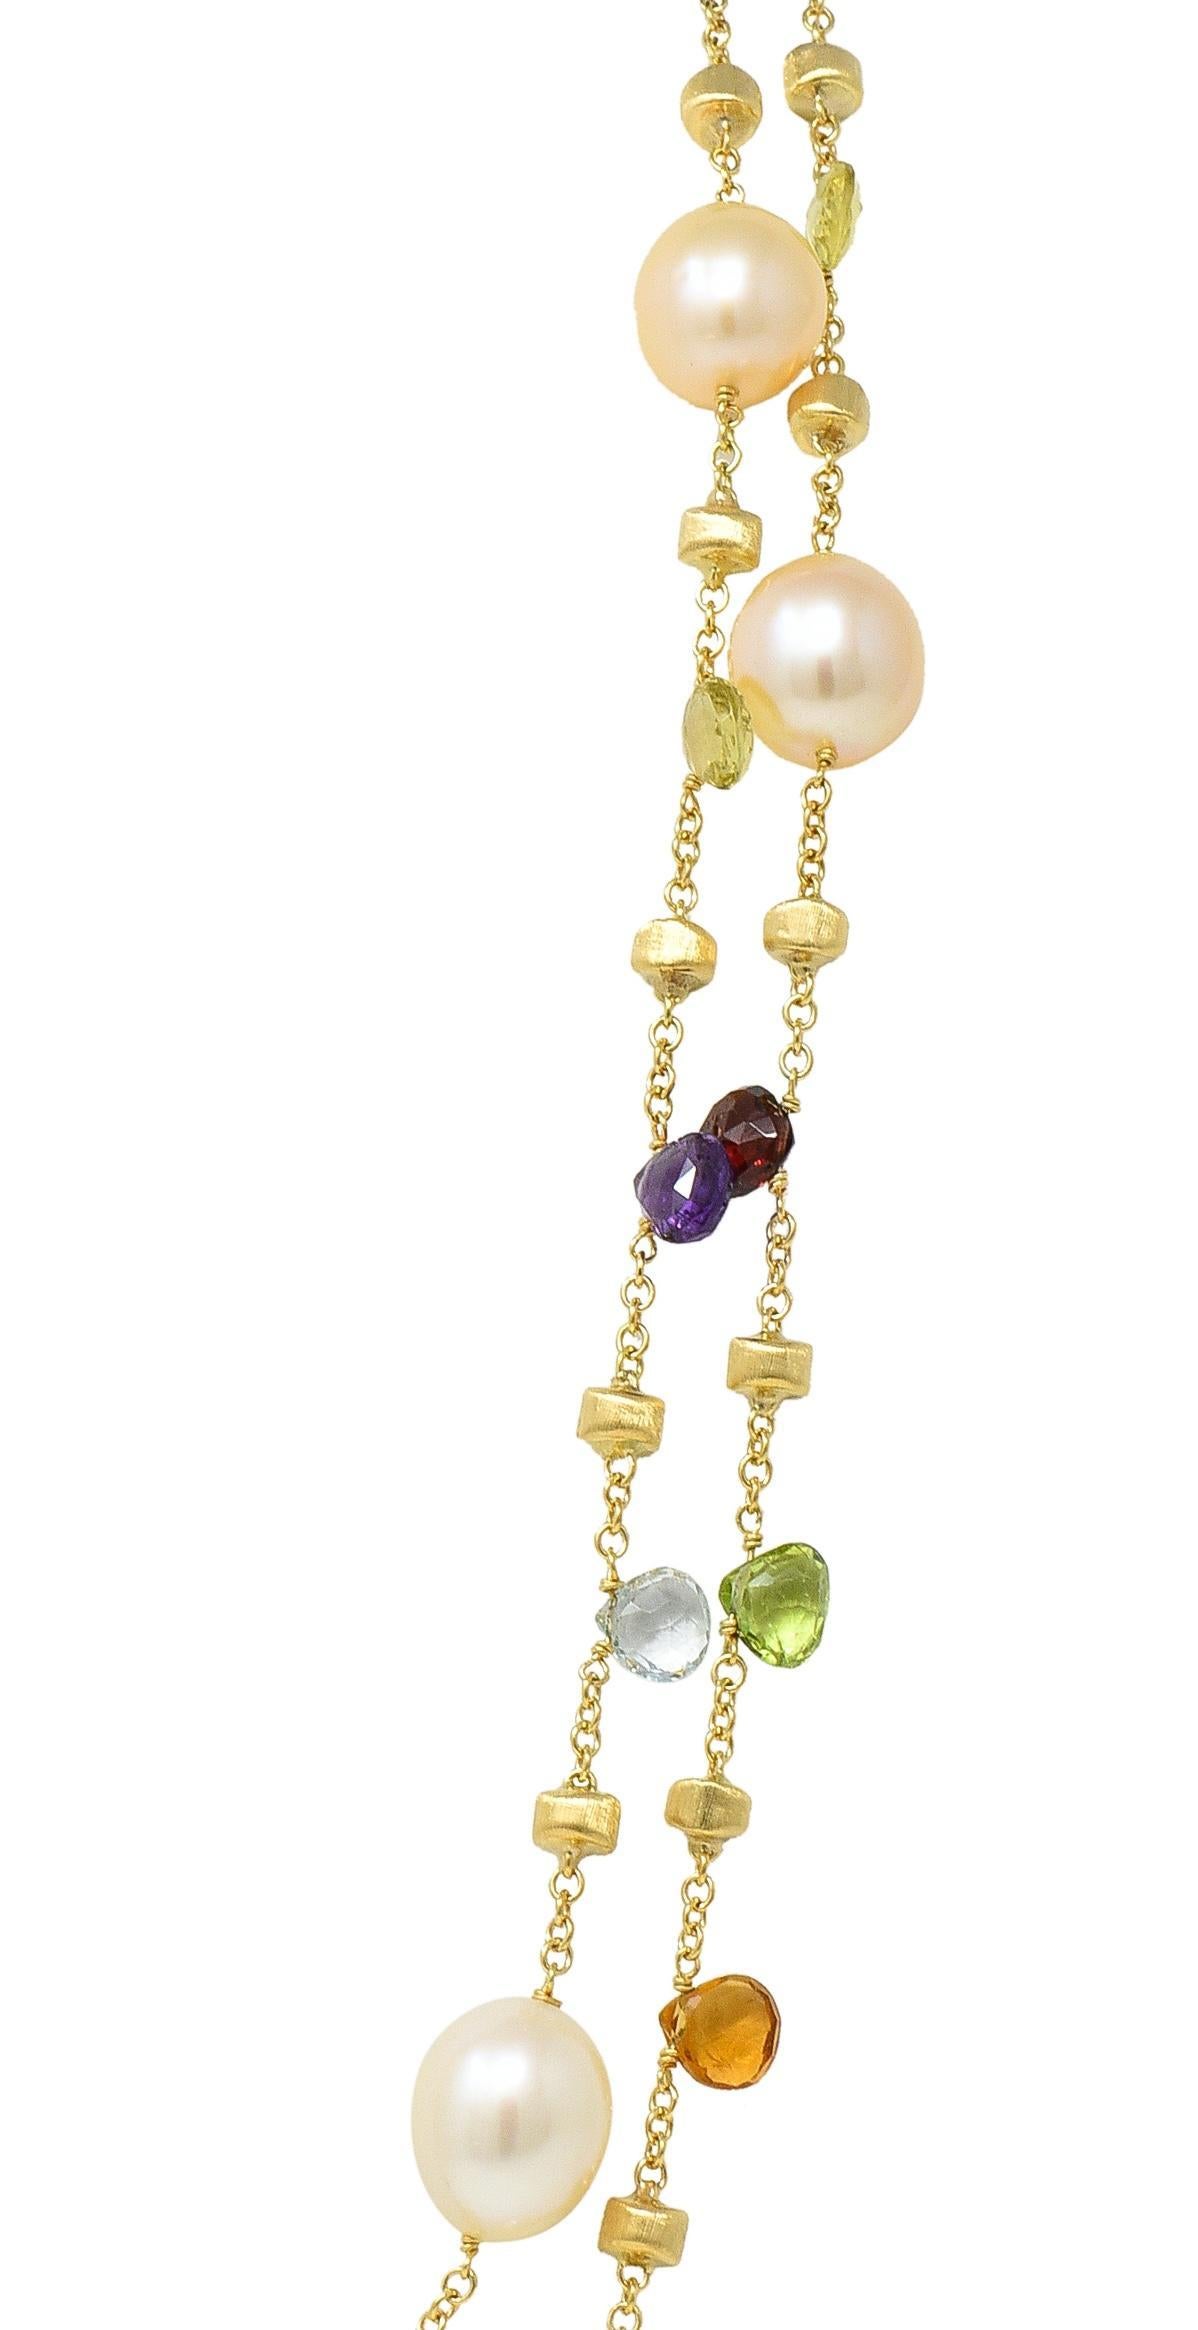 Marco Bicego Cultured Pearl Multi-Gem 18 Karat Yellow Gold Confetti Necklace For Sale 7